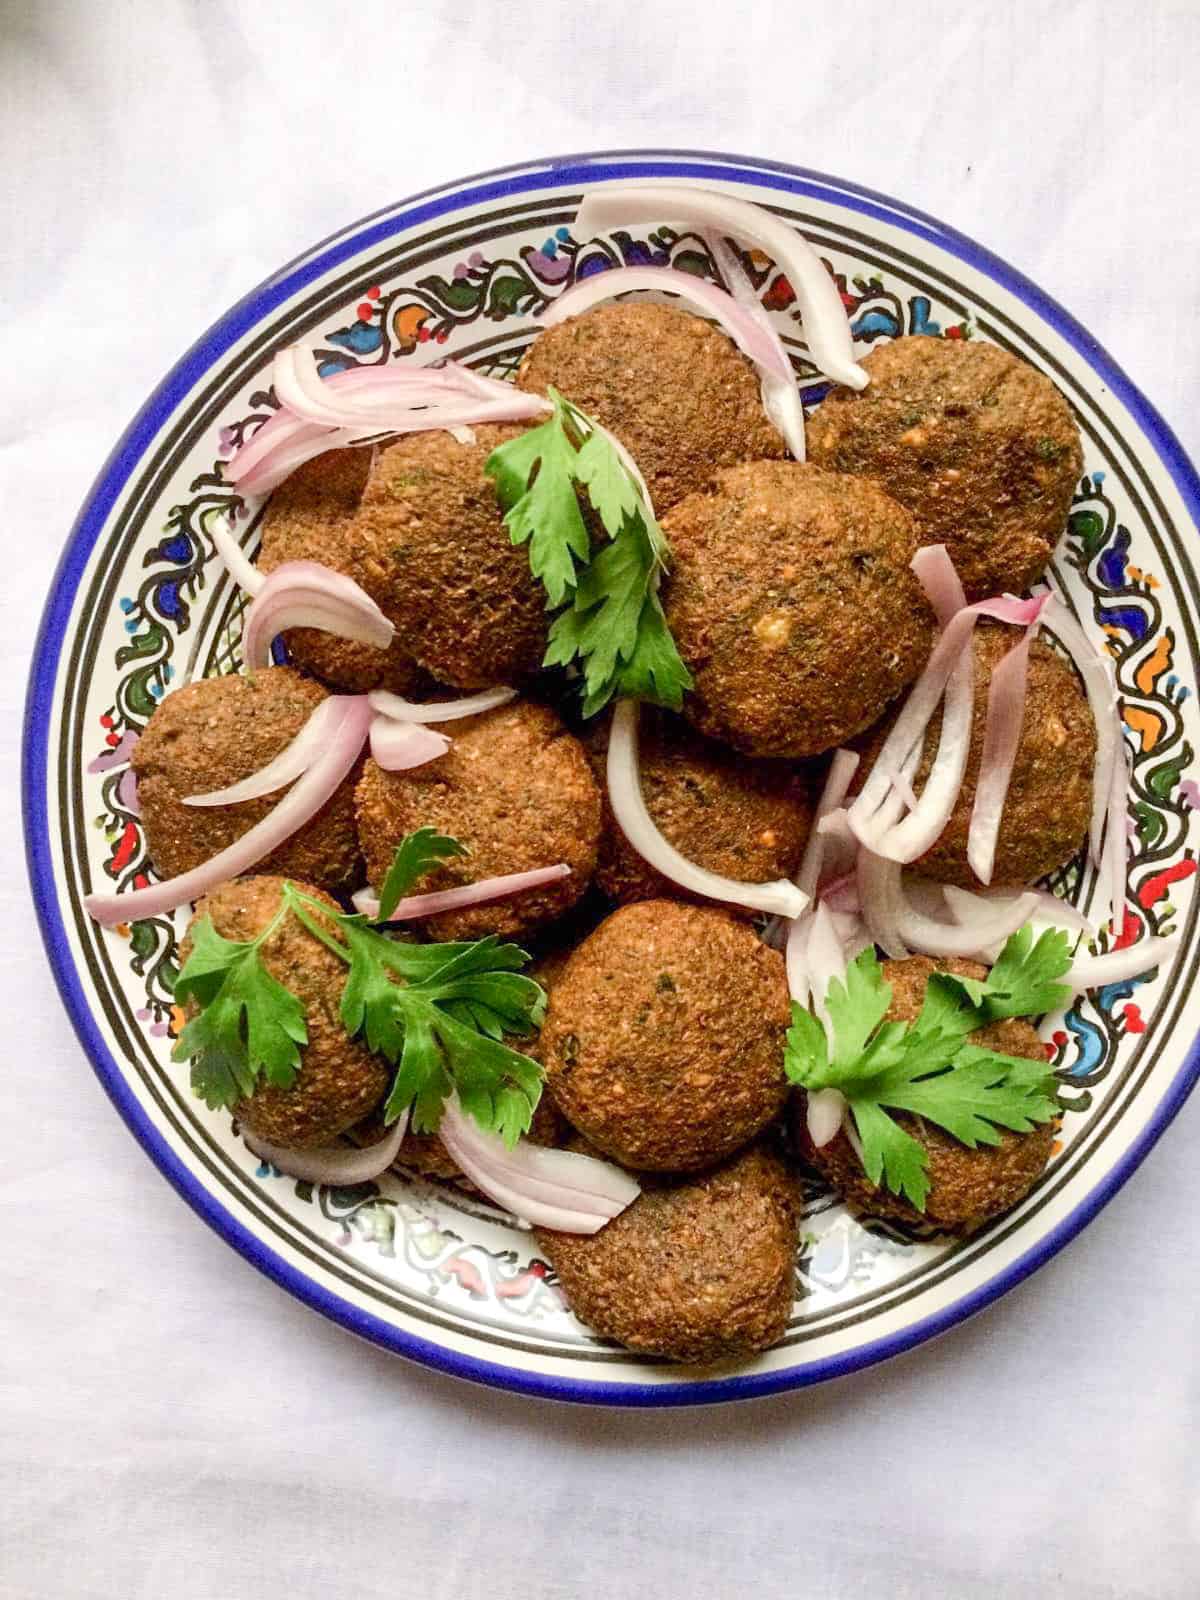 falafel served with onion slices and parsley garnish.